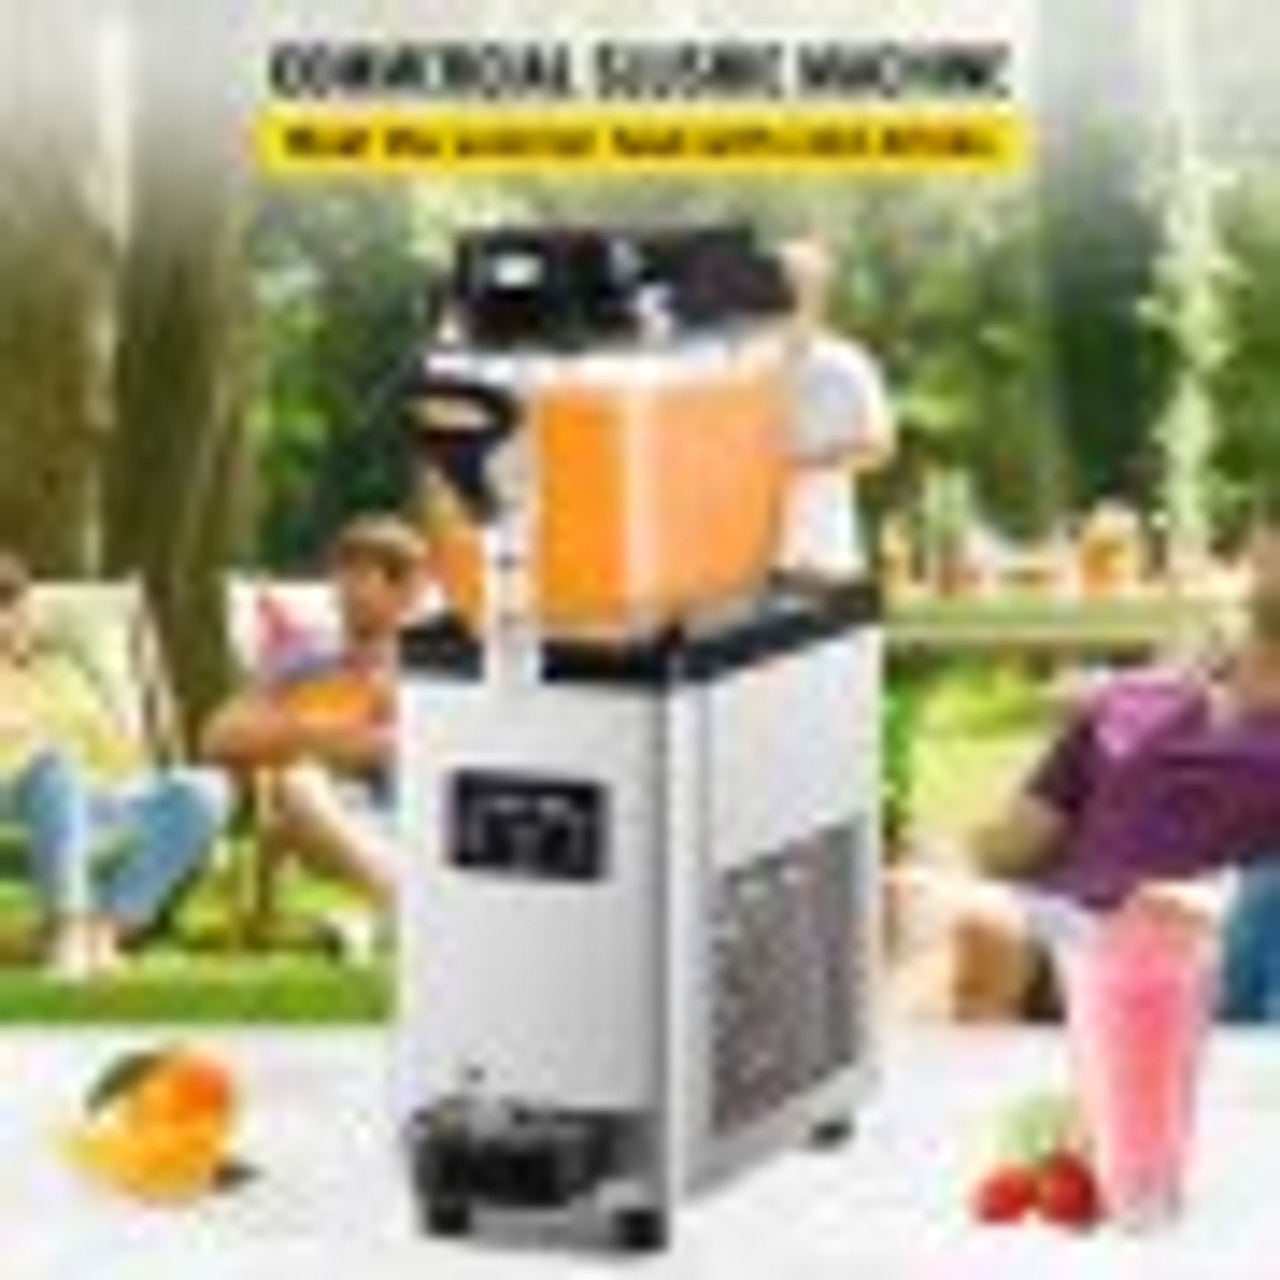 Commercial Slushy Machine, 6L/1.6 Gallons 25 Cups Single-Bowl, 300W 110V, Stainless Steel Margarita Smoothie Frozen Drink Maker, Slushie Machine for Supermarkets Cafes Restaurants Bars Home Use